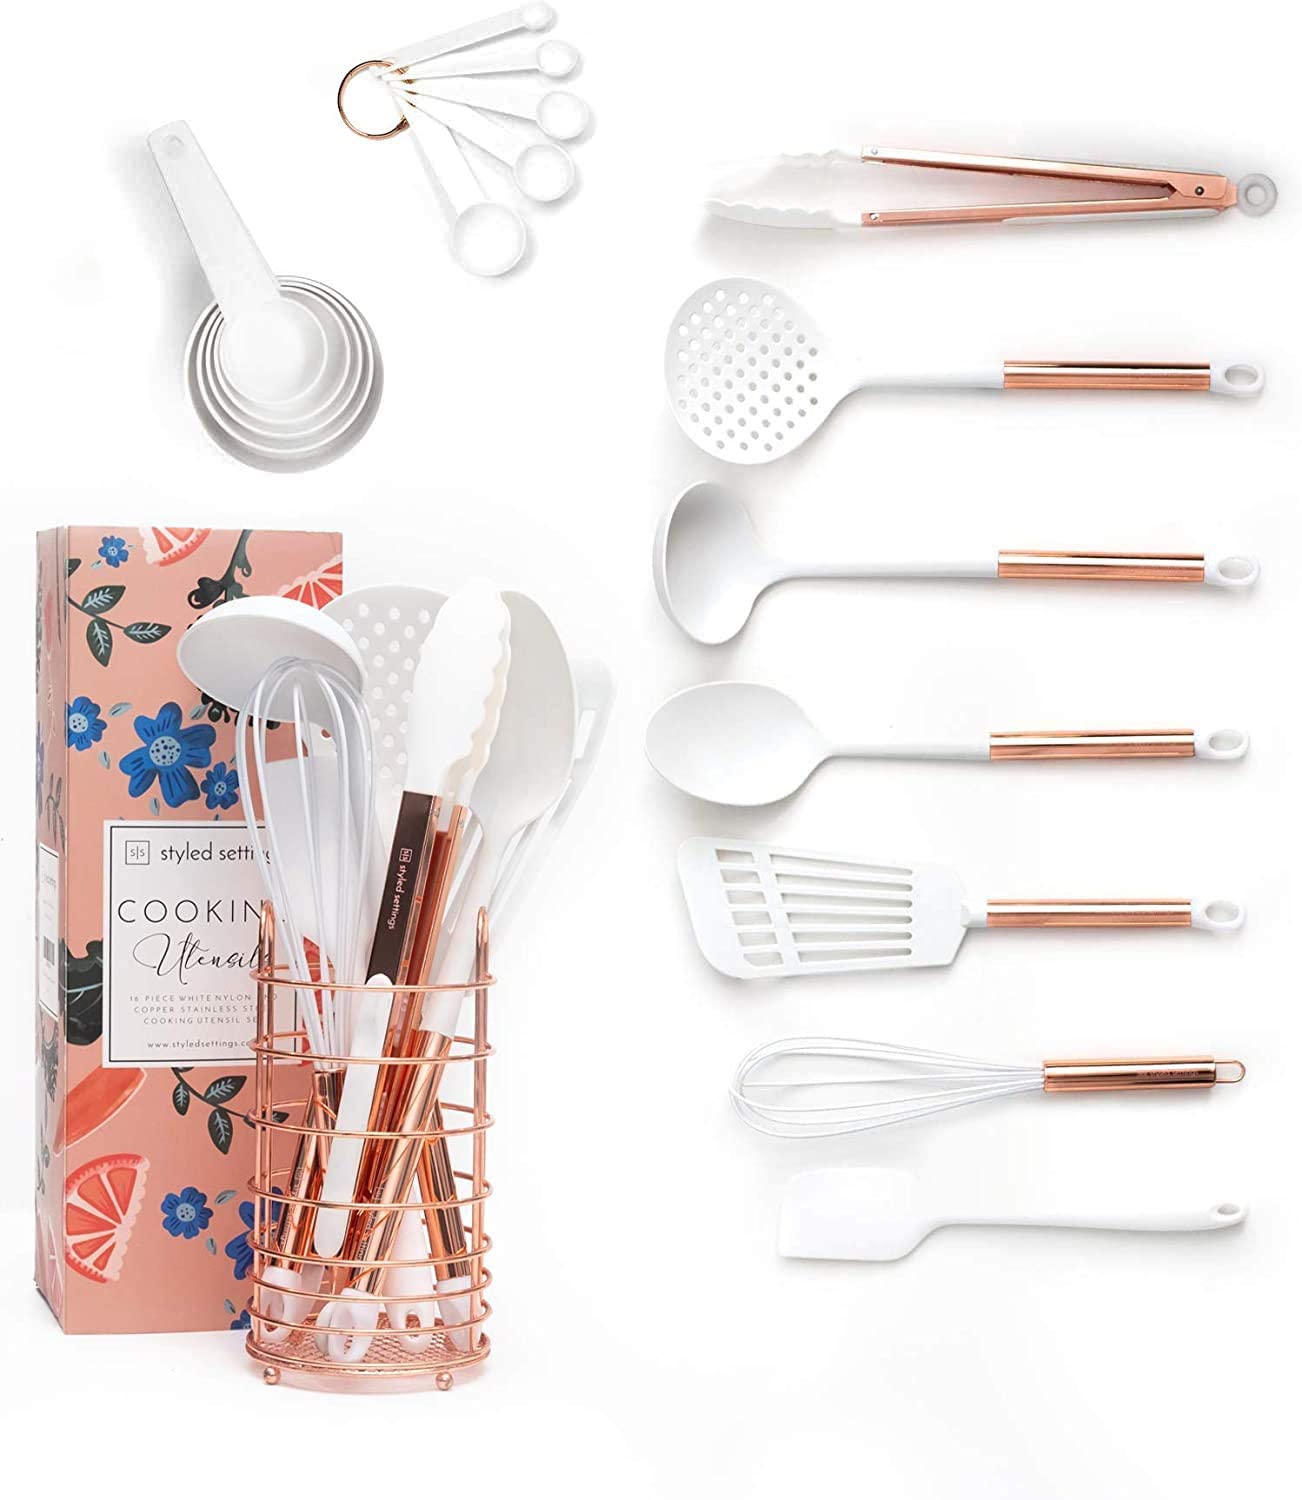 White and Gold Cooking Utensils with Holder - 18 PC Gold Kitchen